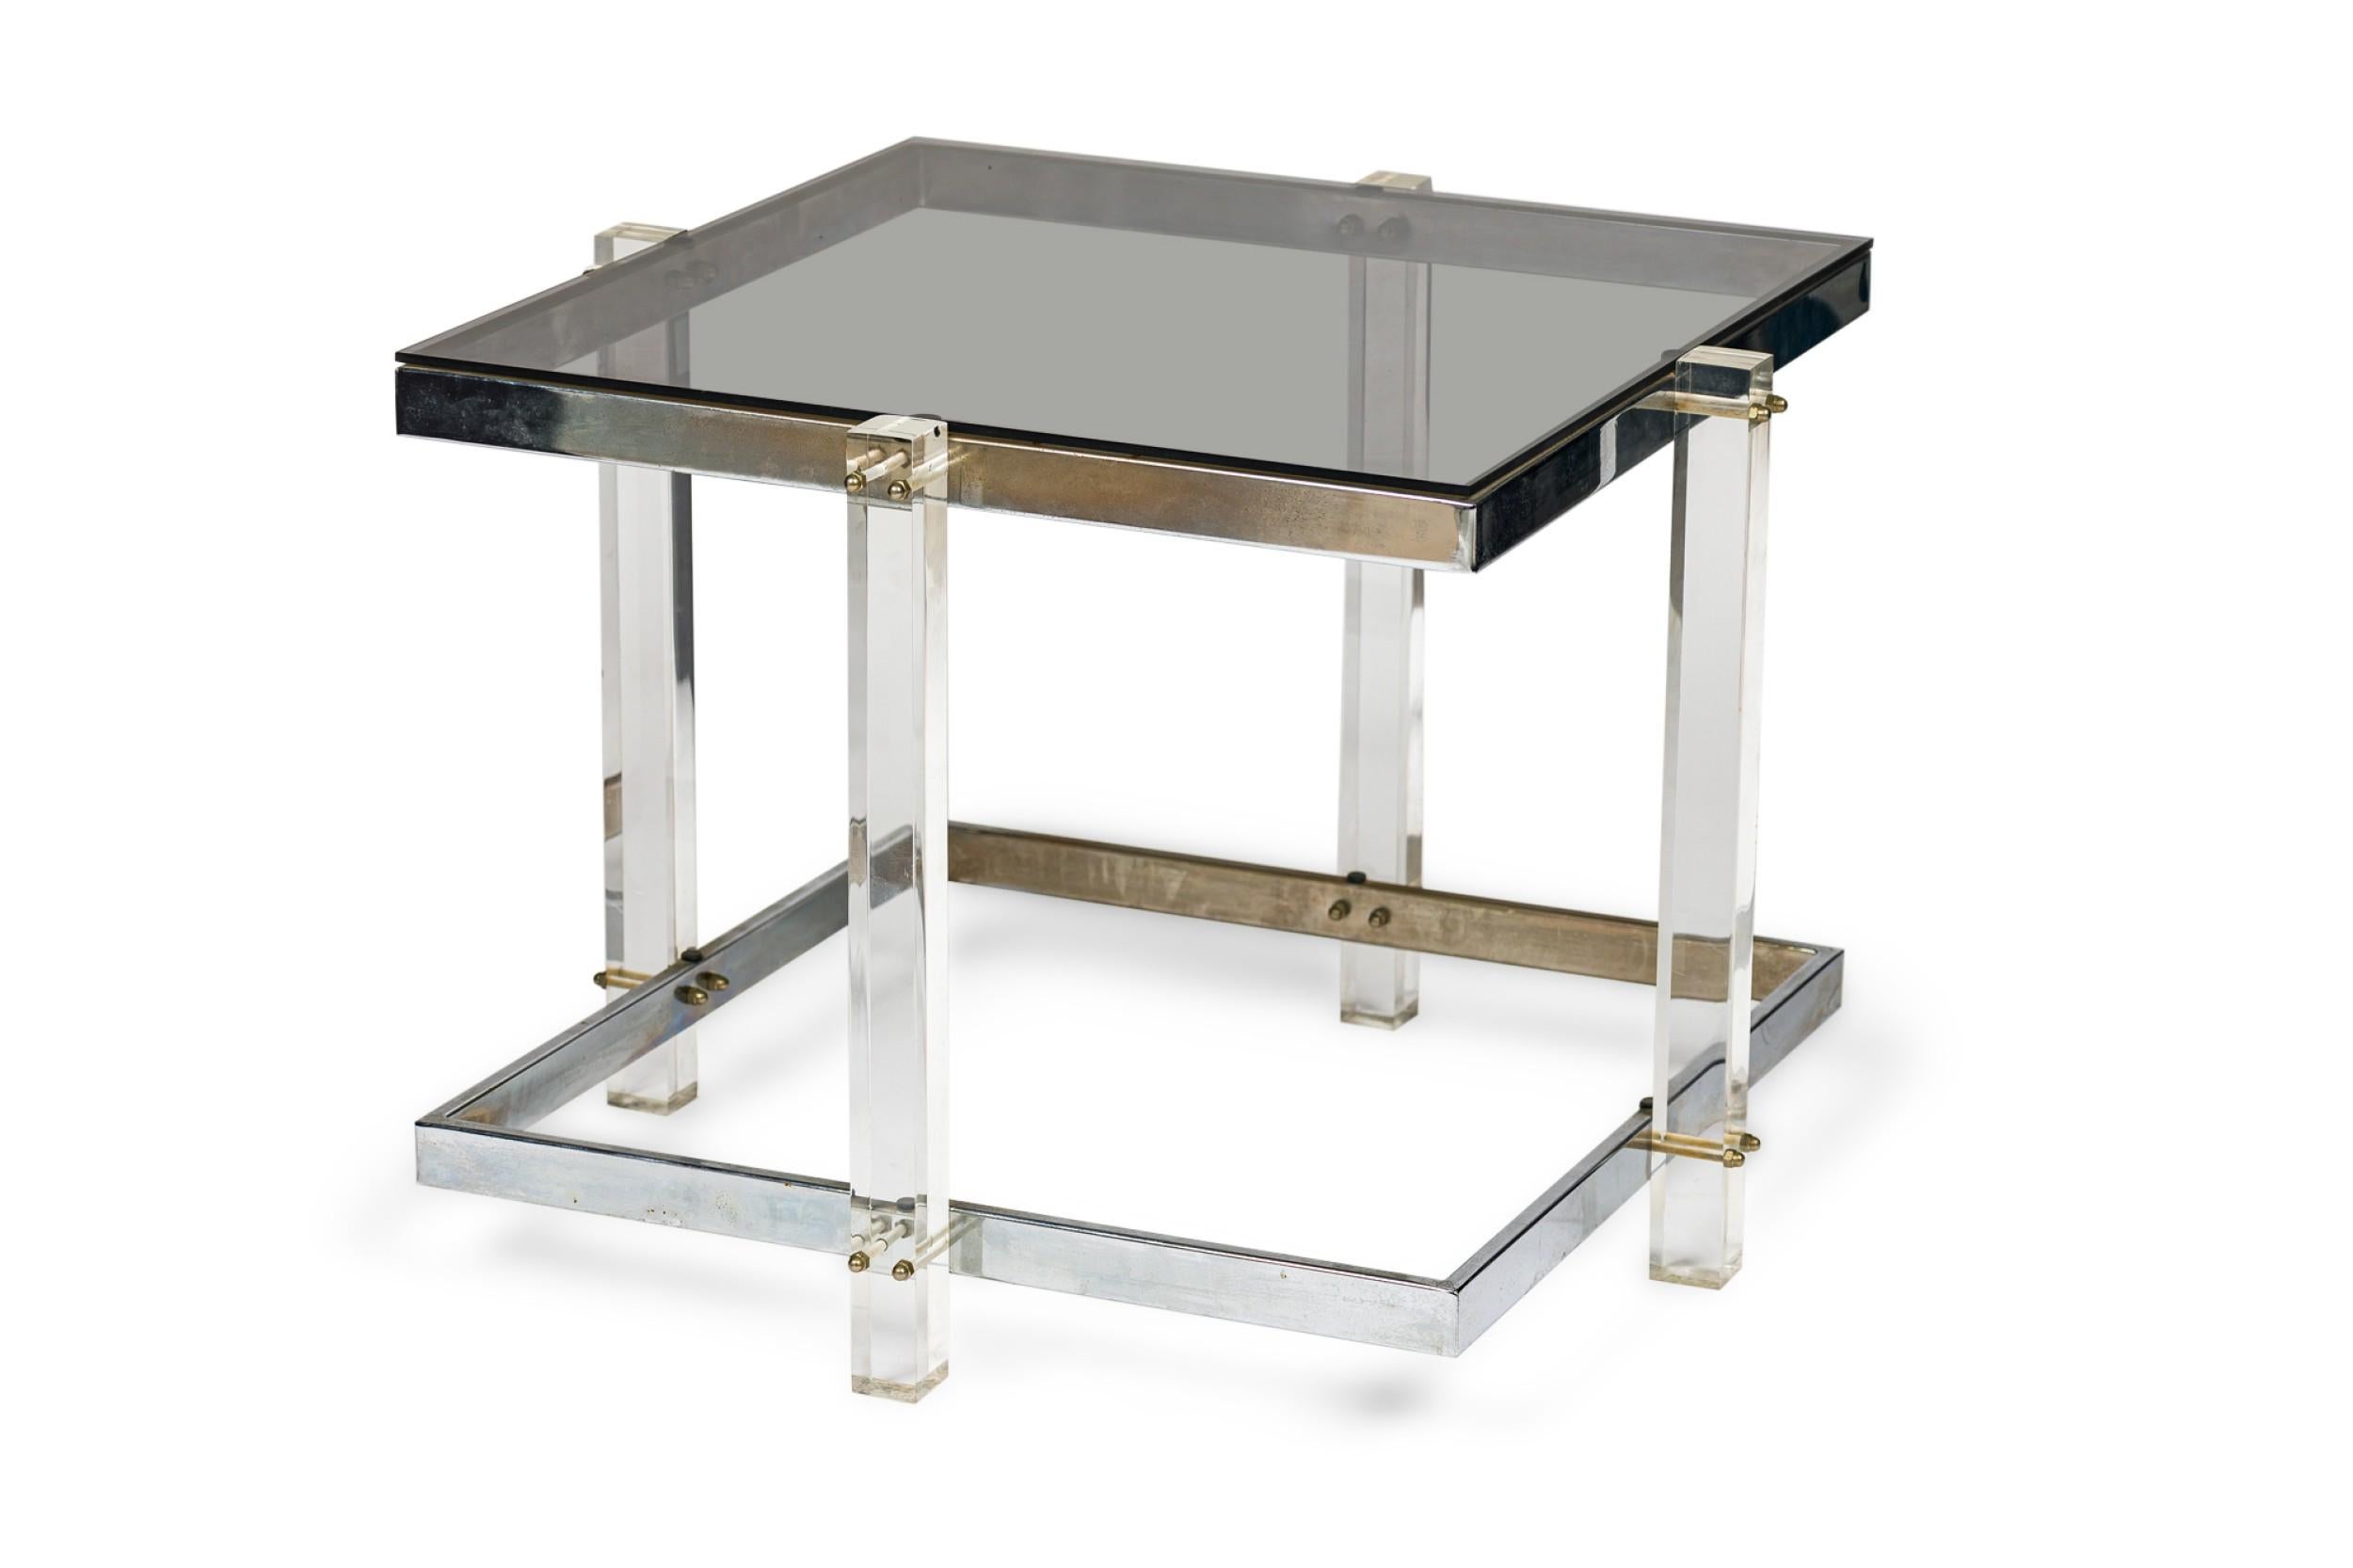 Mid-Century American Modern lucite and chrome rectangular glass topped coffee /end table in minimalist geometric form with a second lower shelf for optional glass placement. (in the style of CHARLES HOLLIS JONES)
 

 Condition Notes:
 Some wear to